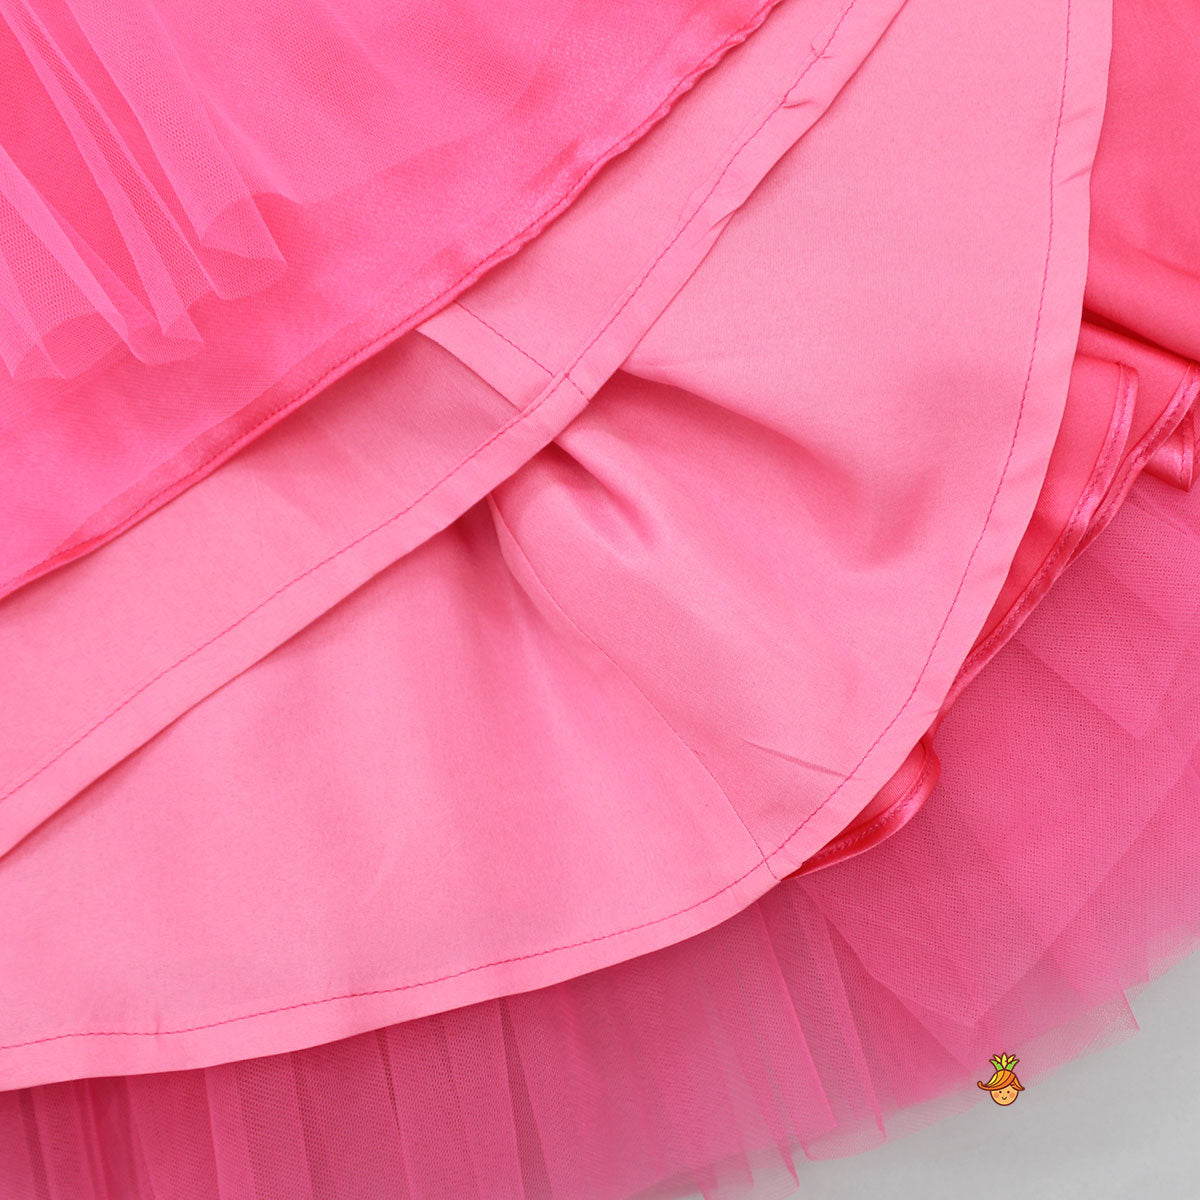 Bow Adorned Pink One Shoulder Gown